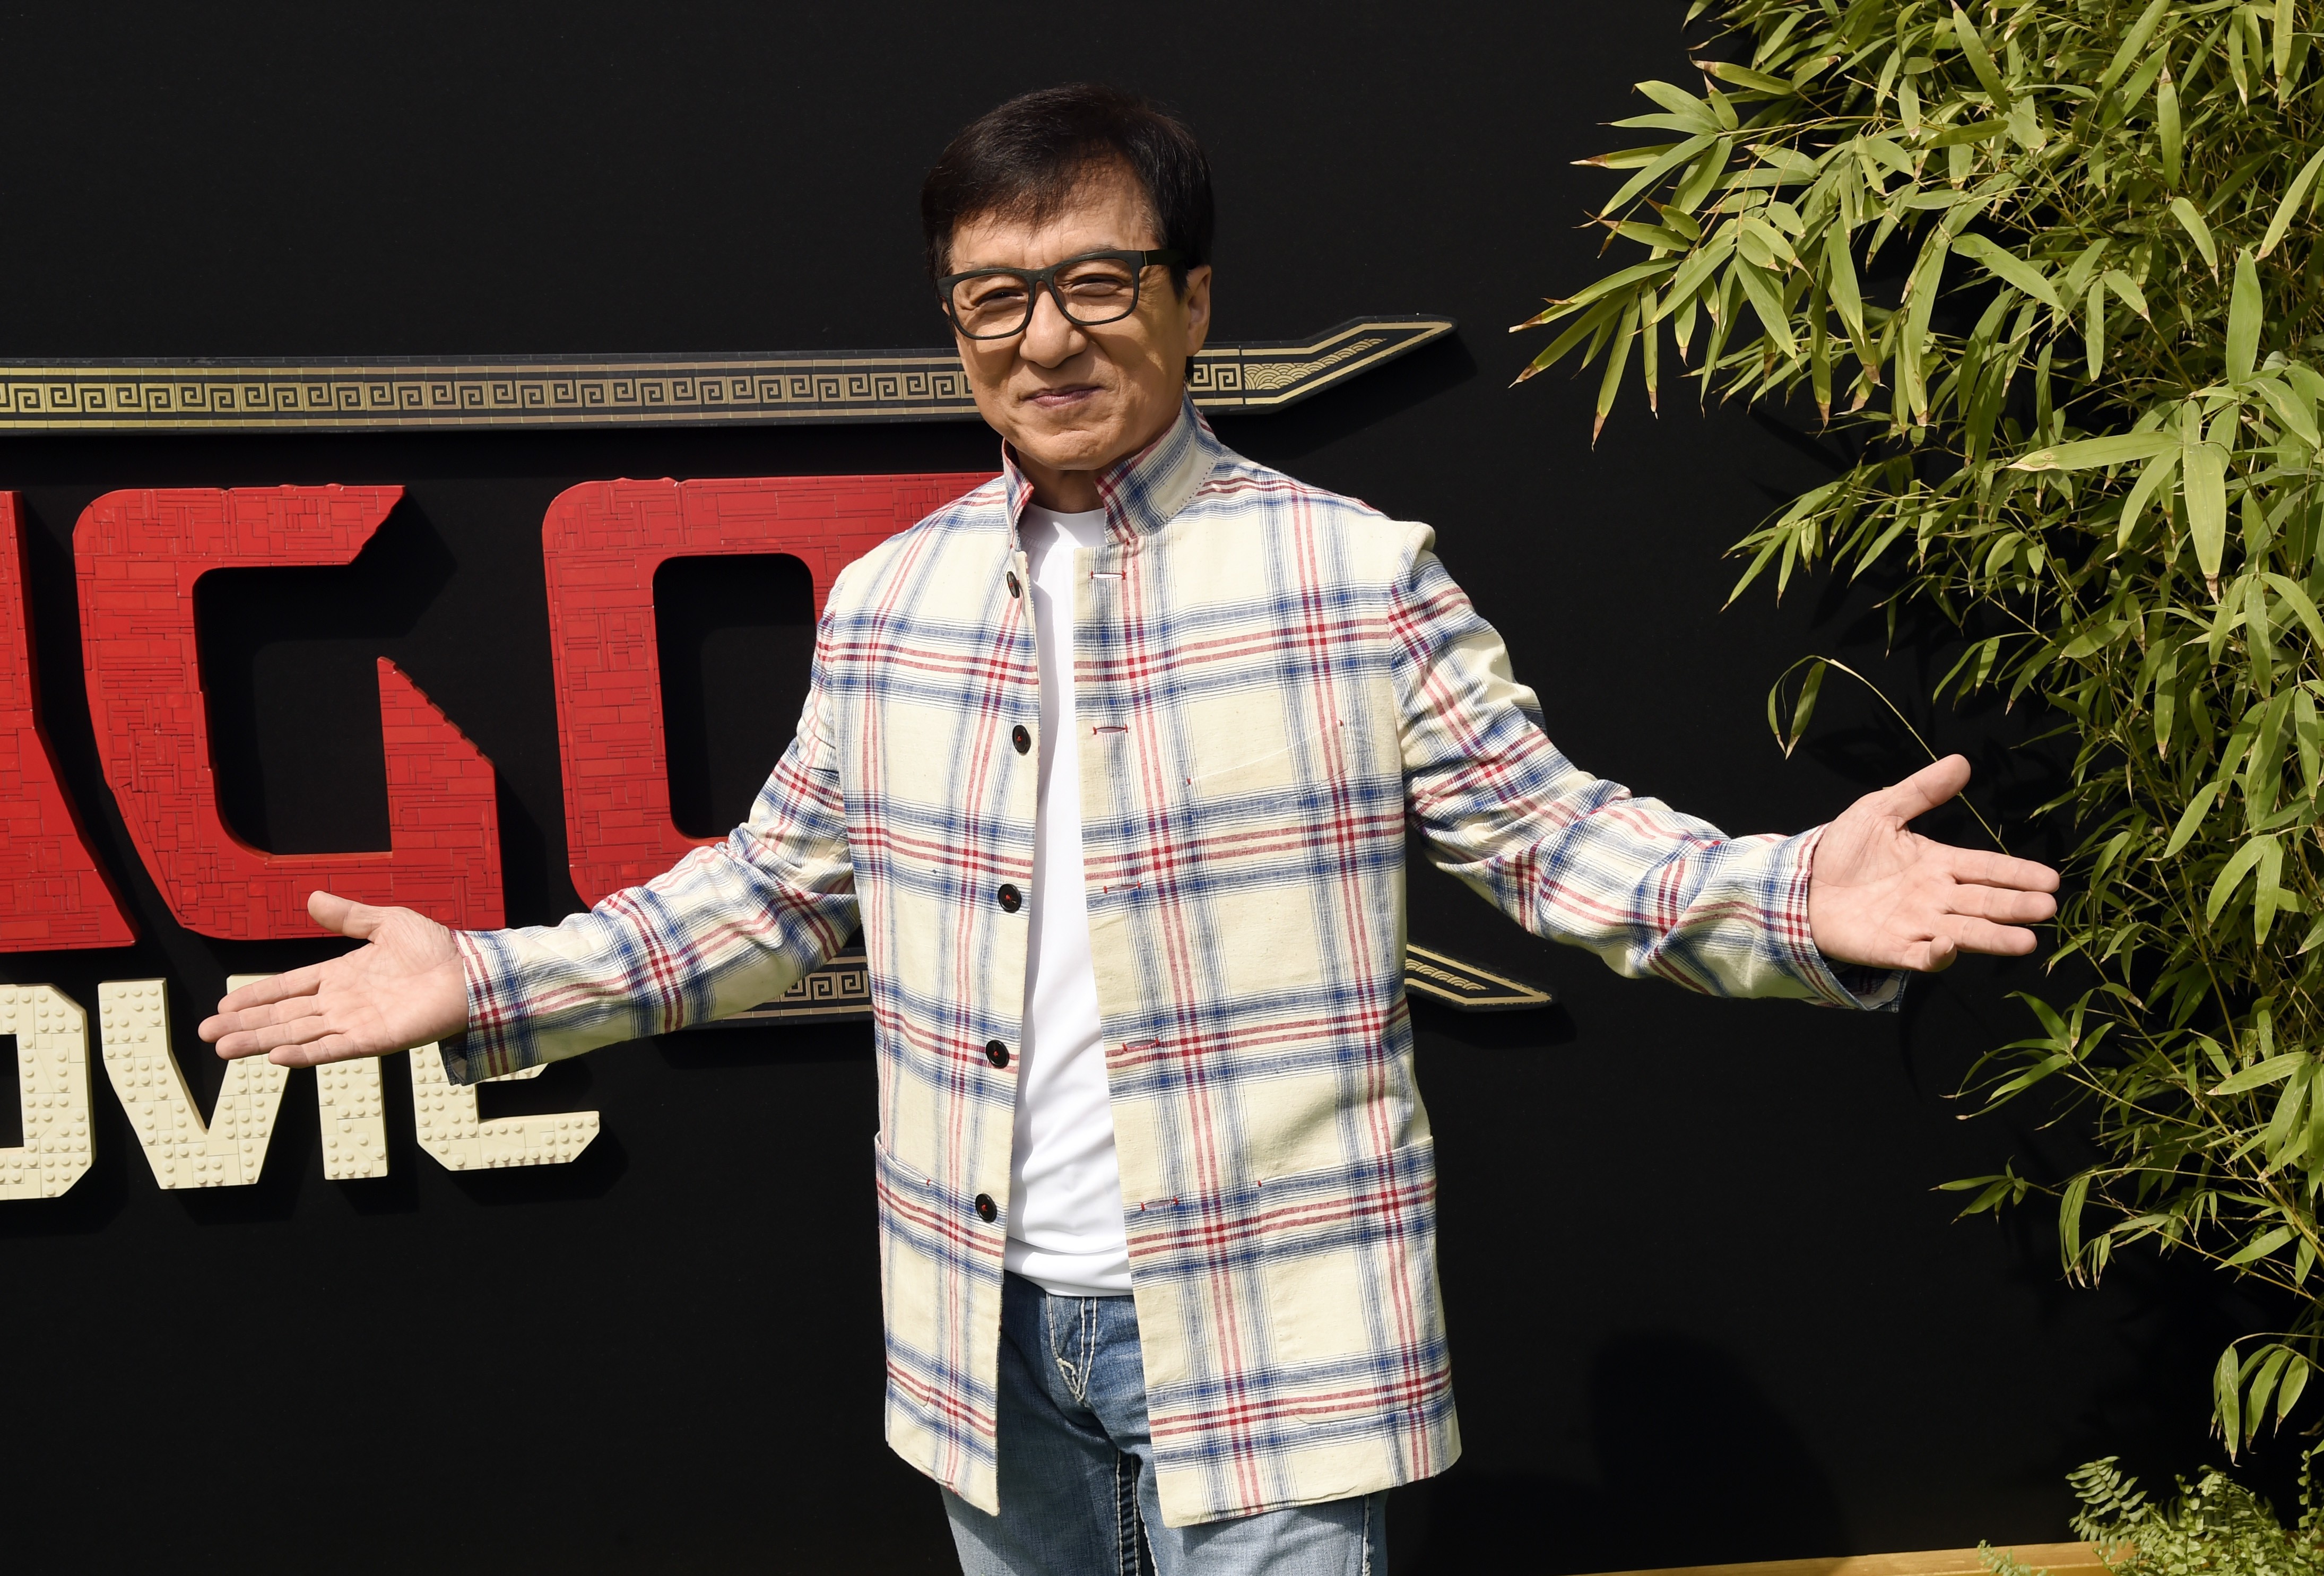 Ahead of shooting his next blockbuster with Cena, Hong Kong action star Chan says his role on screen has a deeper purpose and he wants to work at bringing Chinese culture to the rest of the world